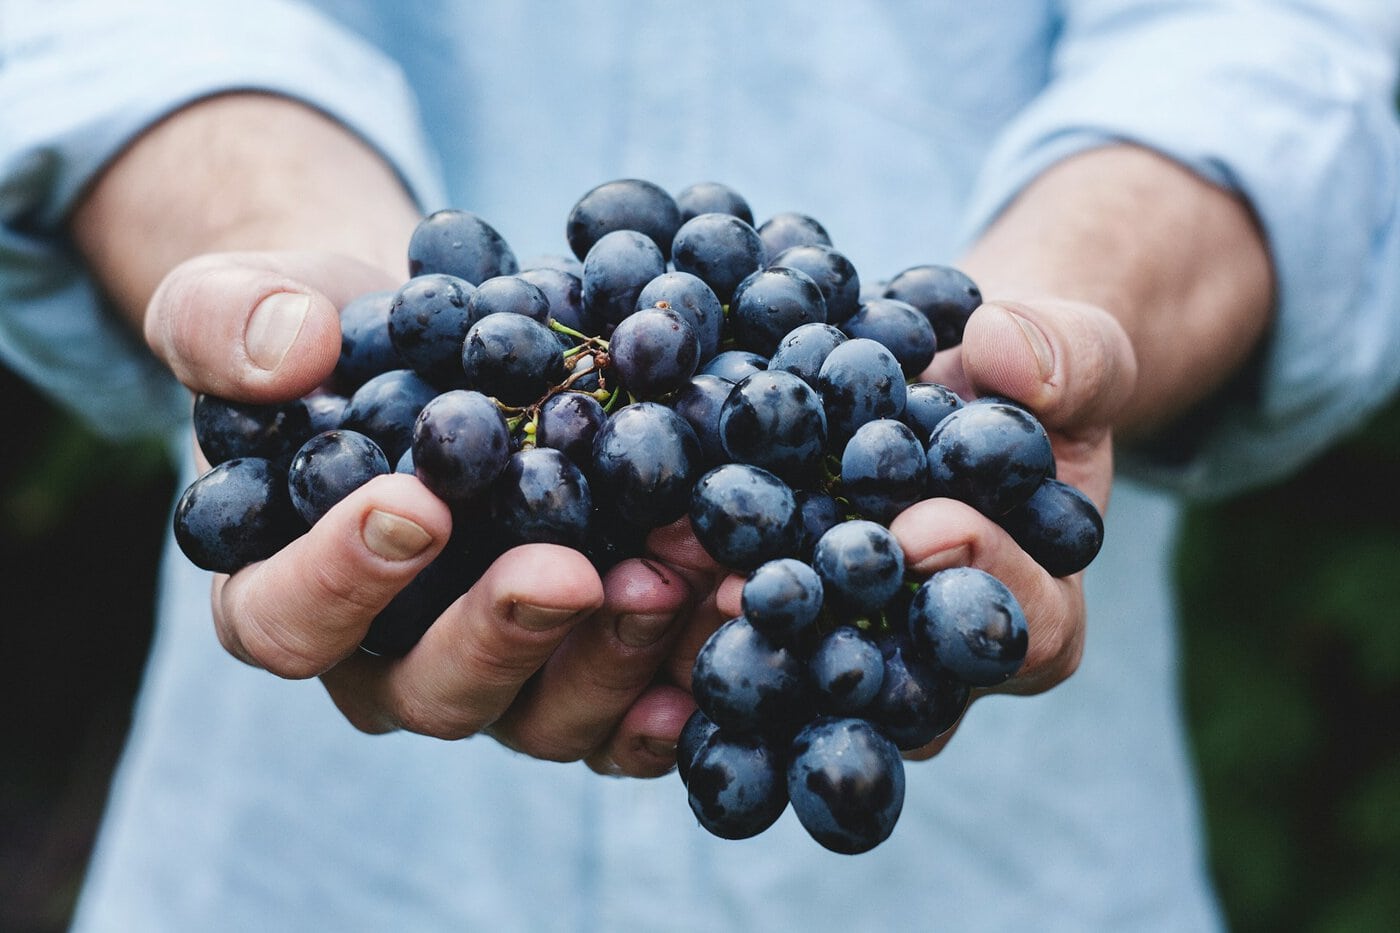 A person holding a bunch of ripe, dark blue grapes in their hands.